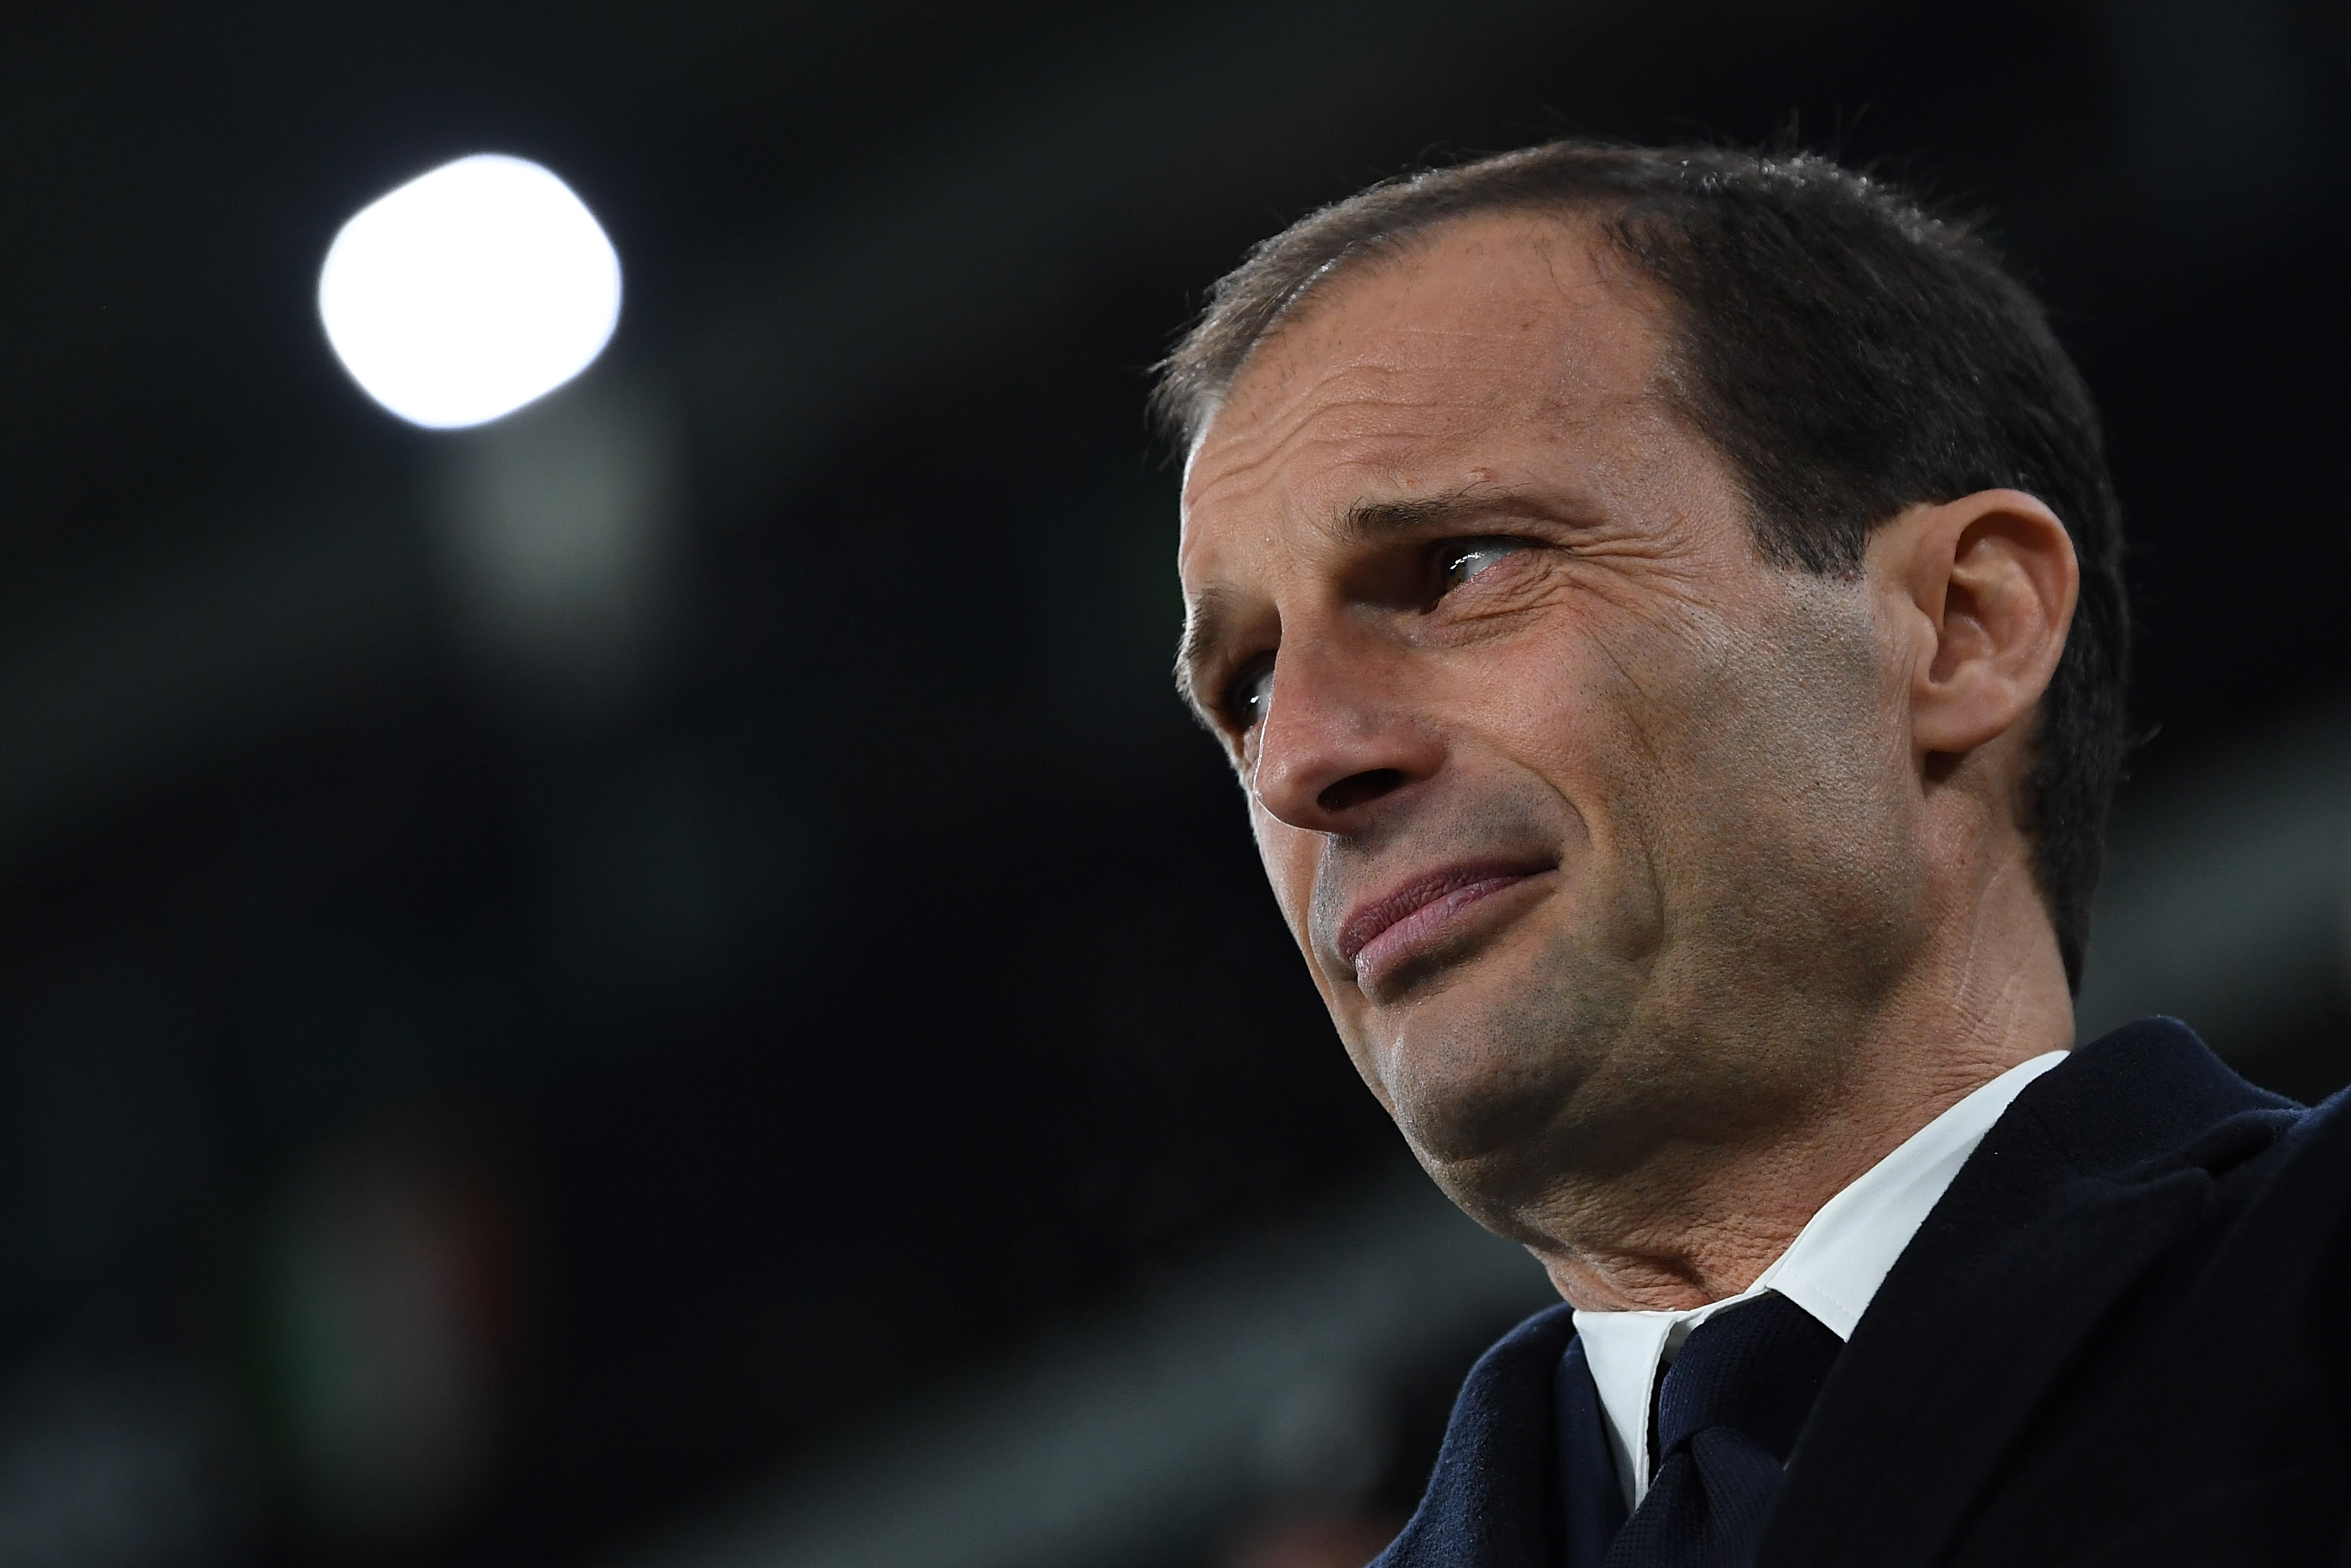 TURIN, ITALY - FEBRUARY 05:  Juventus FC ihead coach Massimiliano Allegri looks on during the Serie A match between Juventus FC and FC Internazionale at Juventus Stadium on February 5, 2017 in Turin, Italy.  (Photo by Valerio Pennicino/Getty Images)